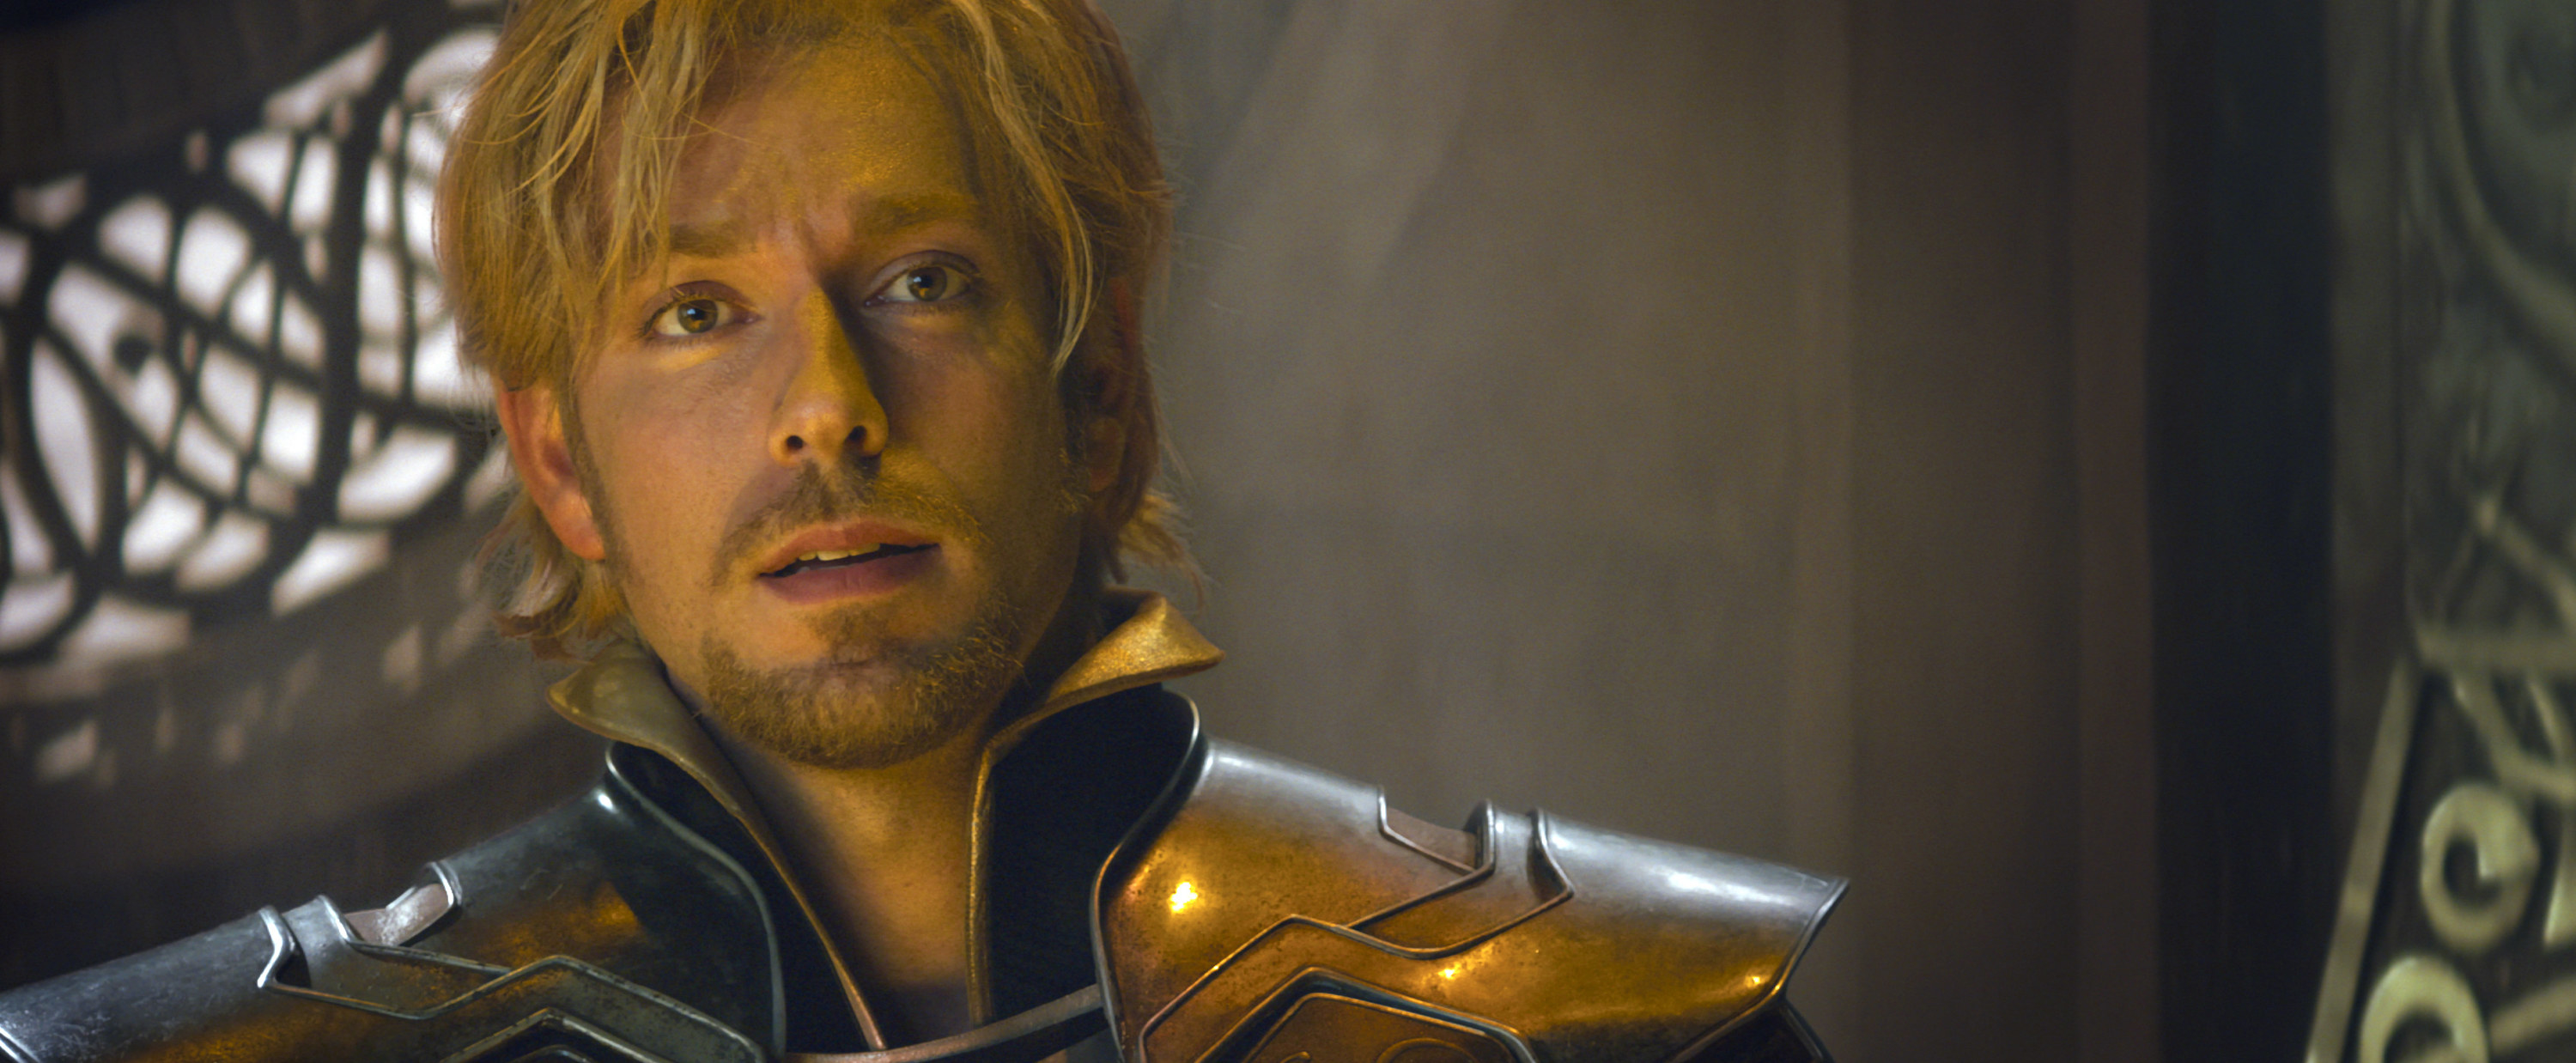 Fandral looks to his friends